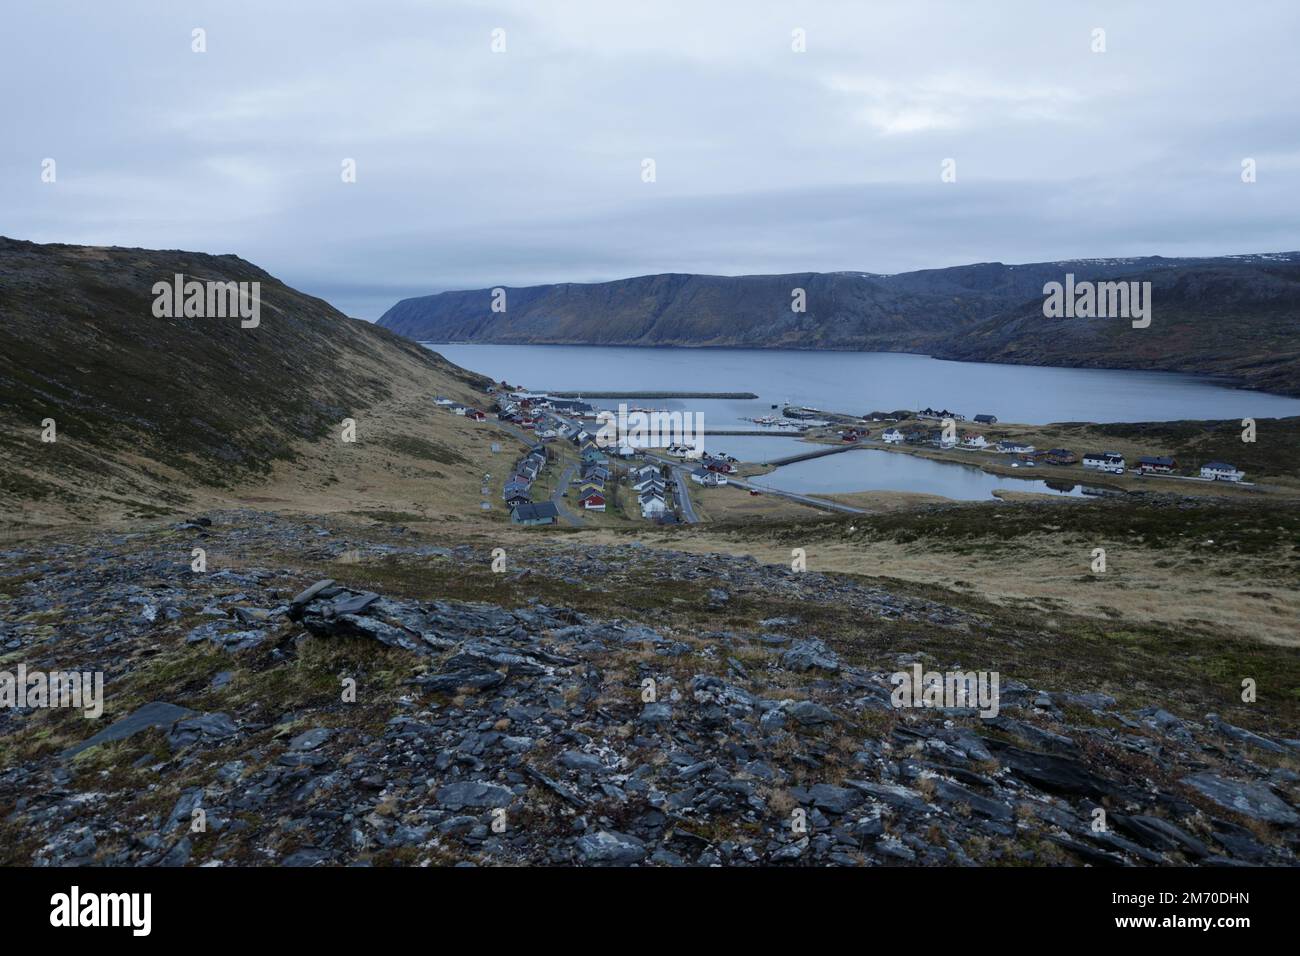 View of the fishing village of Skarsvåg on the Nordkapp in Norway Stock Photo